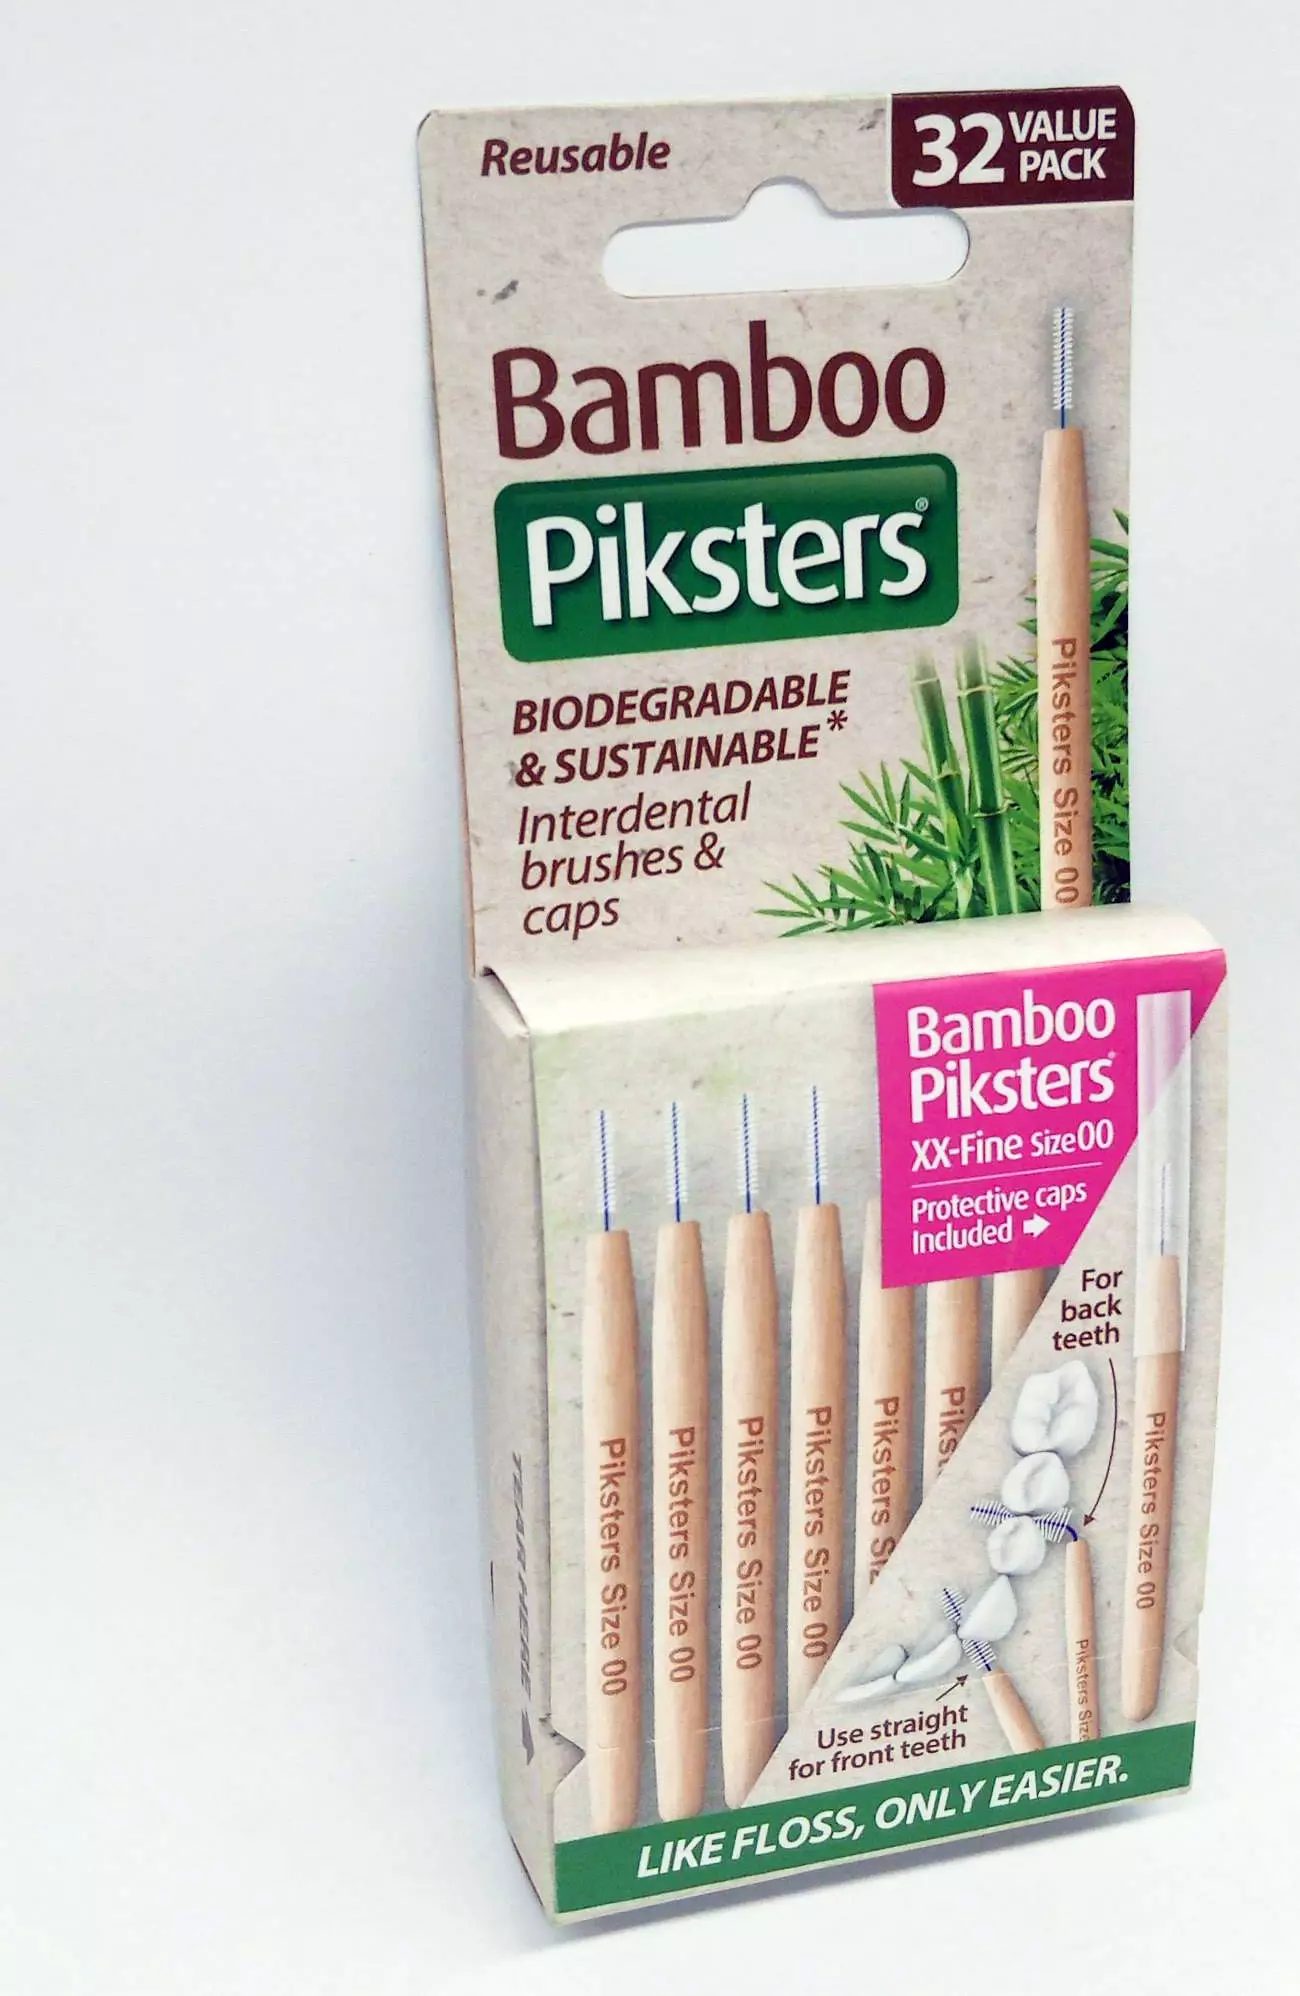 Piksters Bamboo 32db Nr.00 Pink Box 0,32/0,60mm